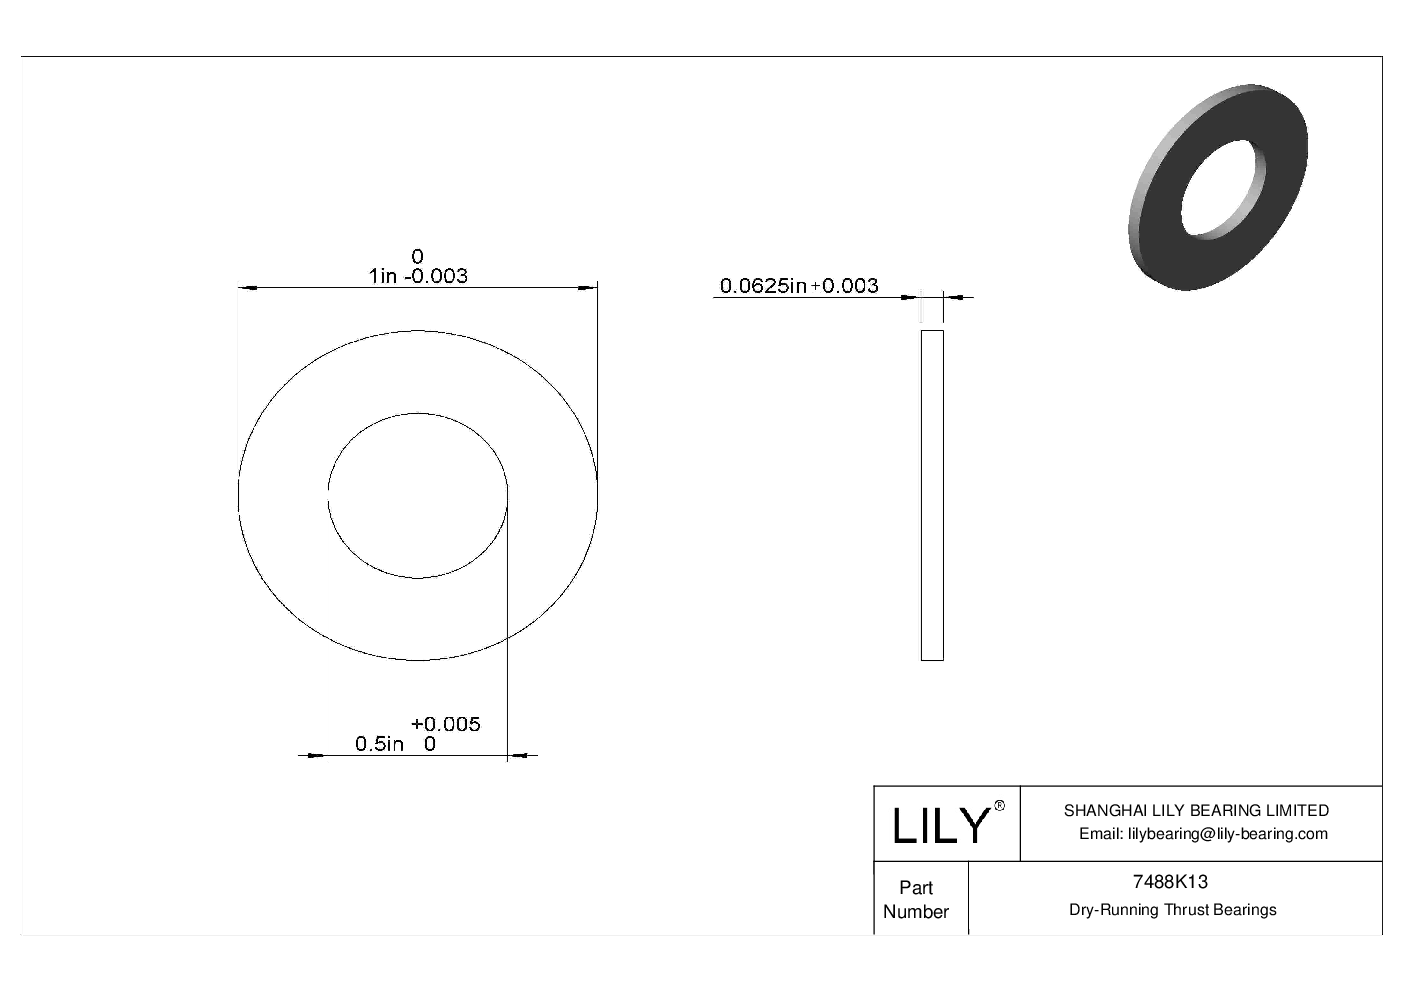 HEIIKBD Ultra-Low-Friction Dry-Running Thrust Bearings cad drawing